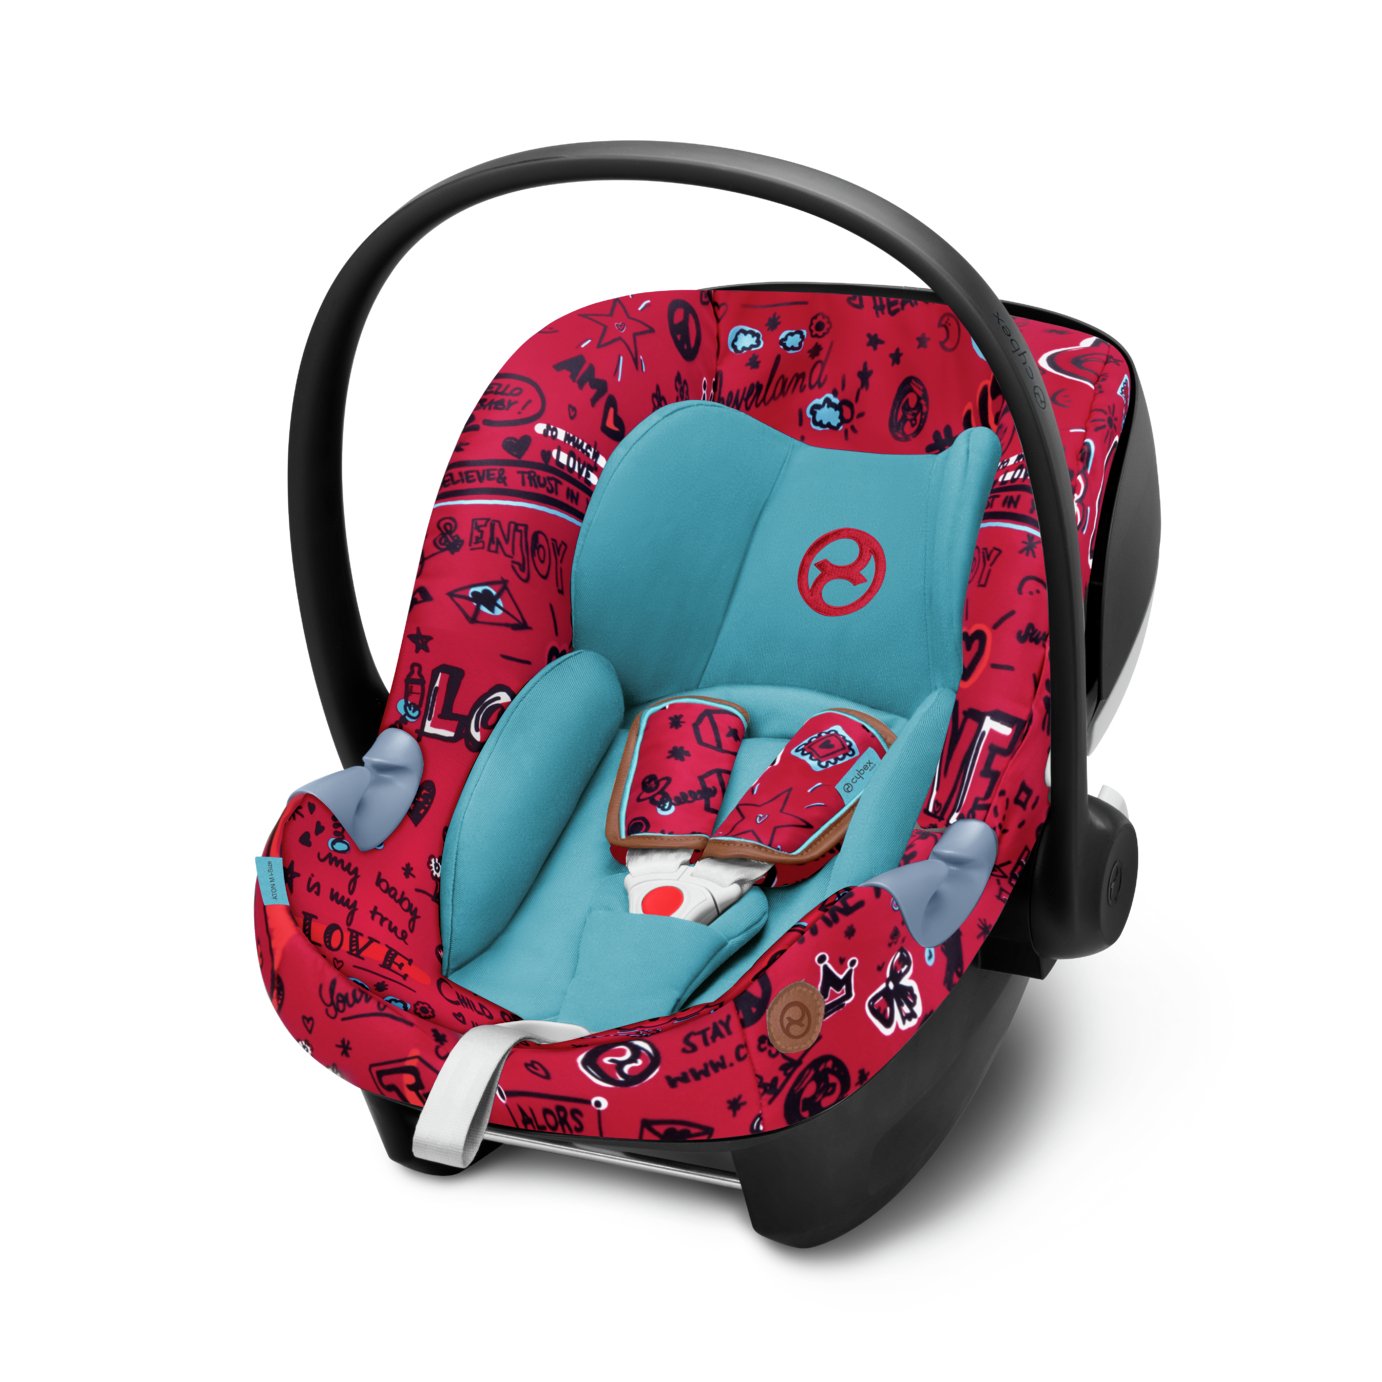 Cybex Aton M Group 0+ i-Size Car Seat - Love Red